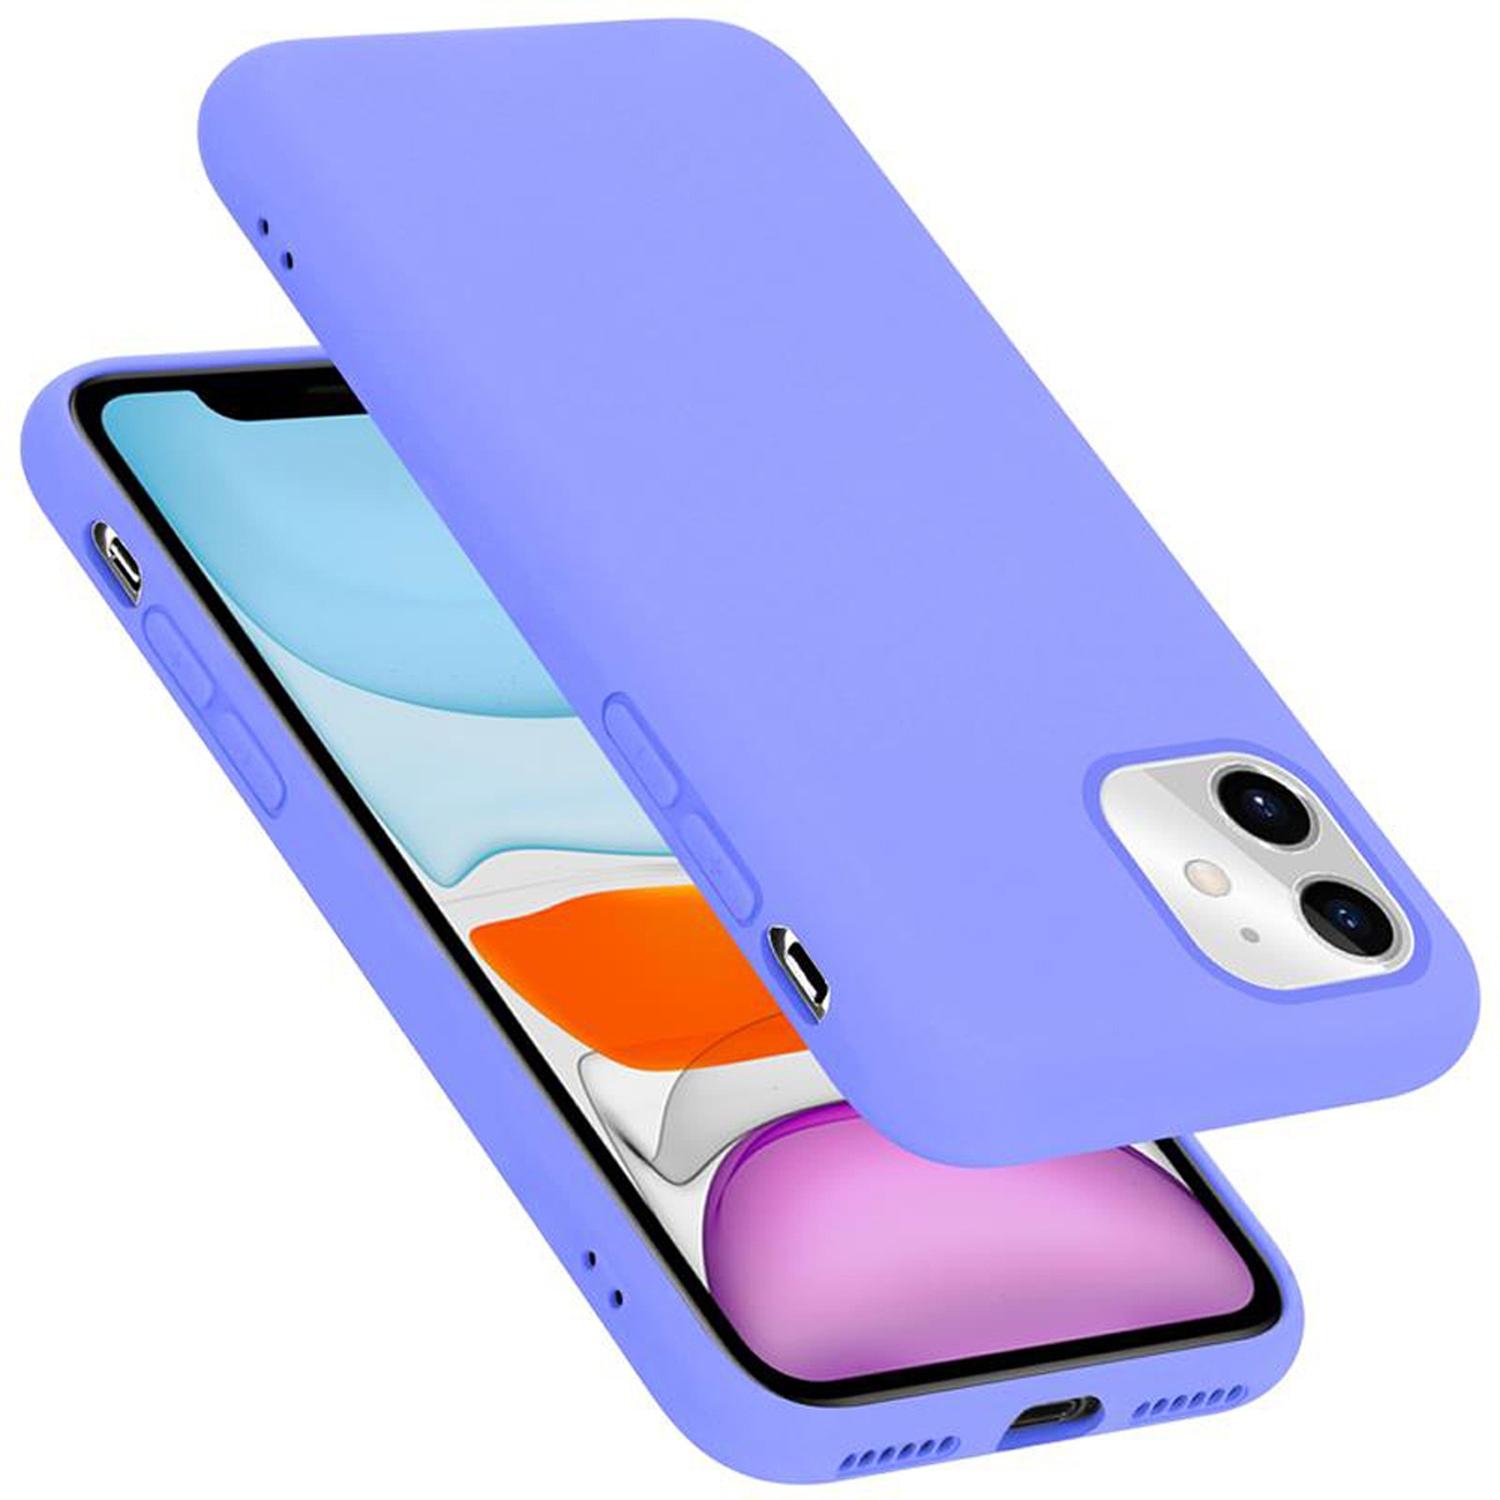 HELL im Hülle Style, CADORABO Apple, iPhone Silicone 11, LIQUID Backcover, Liquid Case LILA